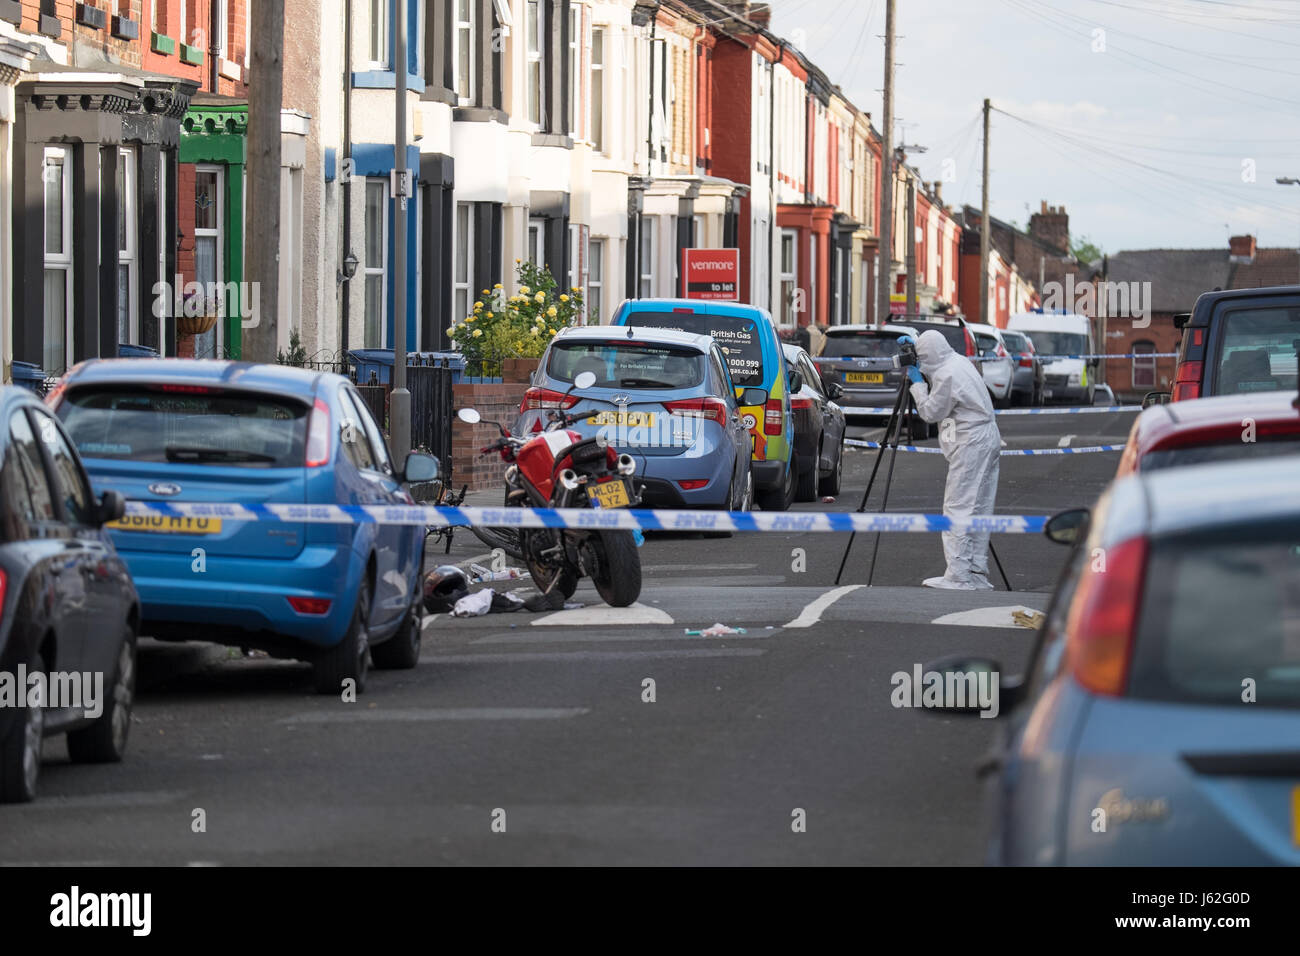 Liverpool, UK. 19th May, 2017. A 26-year-old man is reported to have been shot multiple times in an incident described as a 'targeted attack'. The incident took place on Stevenson Street in the Wavertree area of Liverpool at around 3:50pm on Friday, May 19, 2017. Credit: Christopher Middleton/Alamy Live News Stock Photo